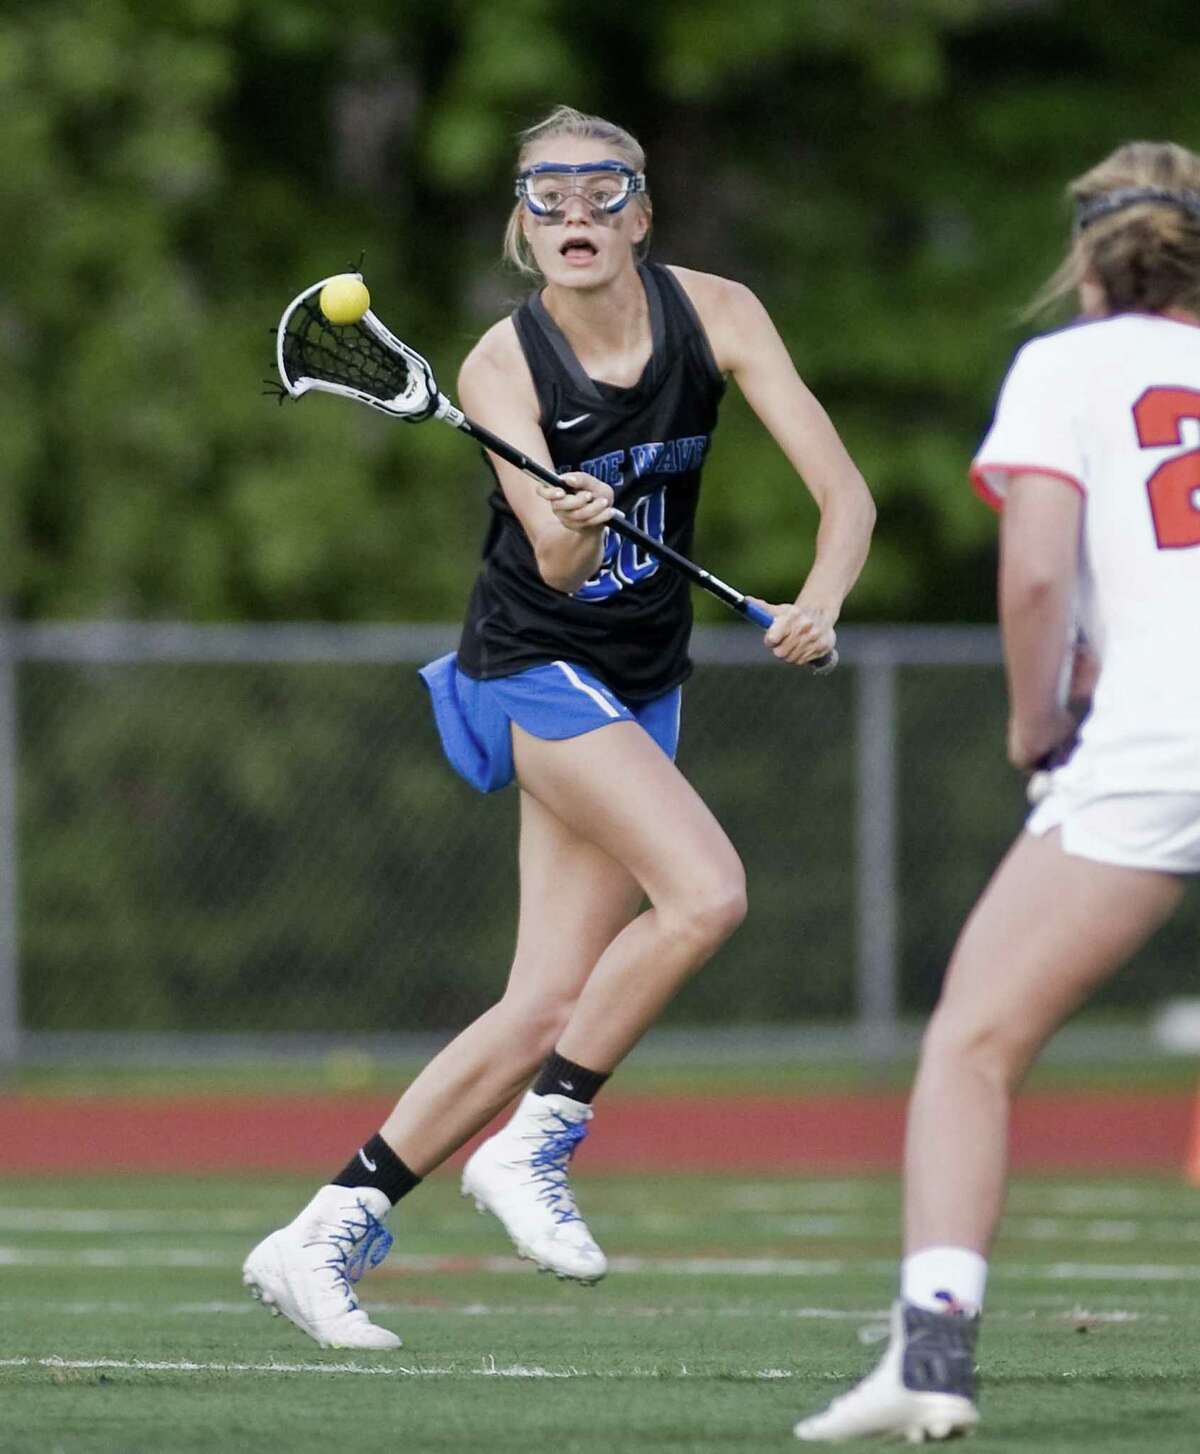 Darien High School's Katie Ramsay receives the ball in the FCIAC girls lacrosse finals against Ridgefield High School, played at Norwalk High School. Wednesday, May 24, 2017